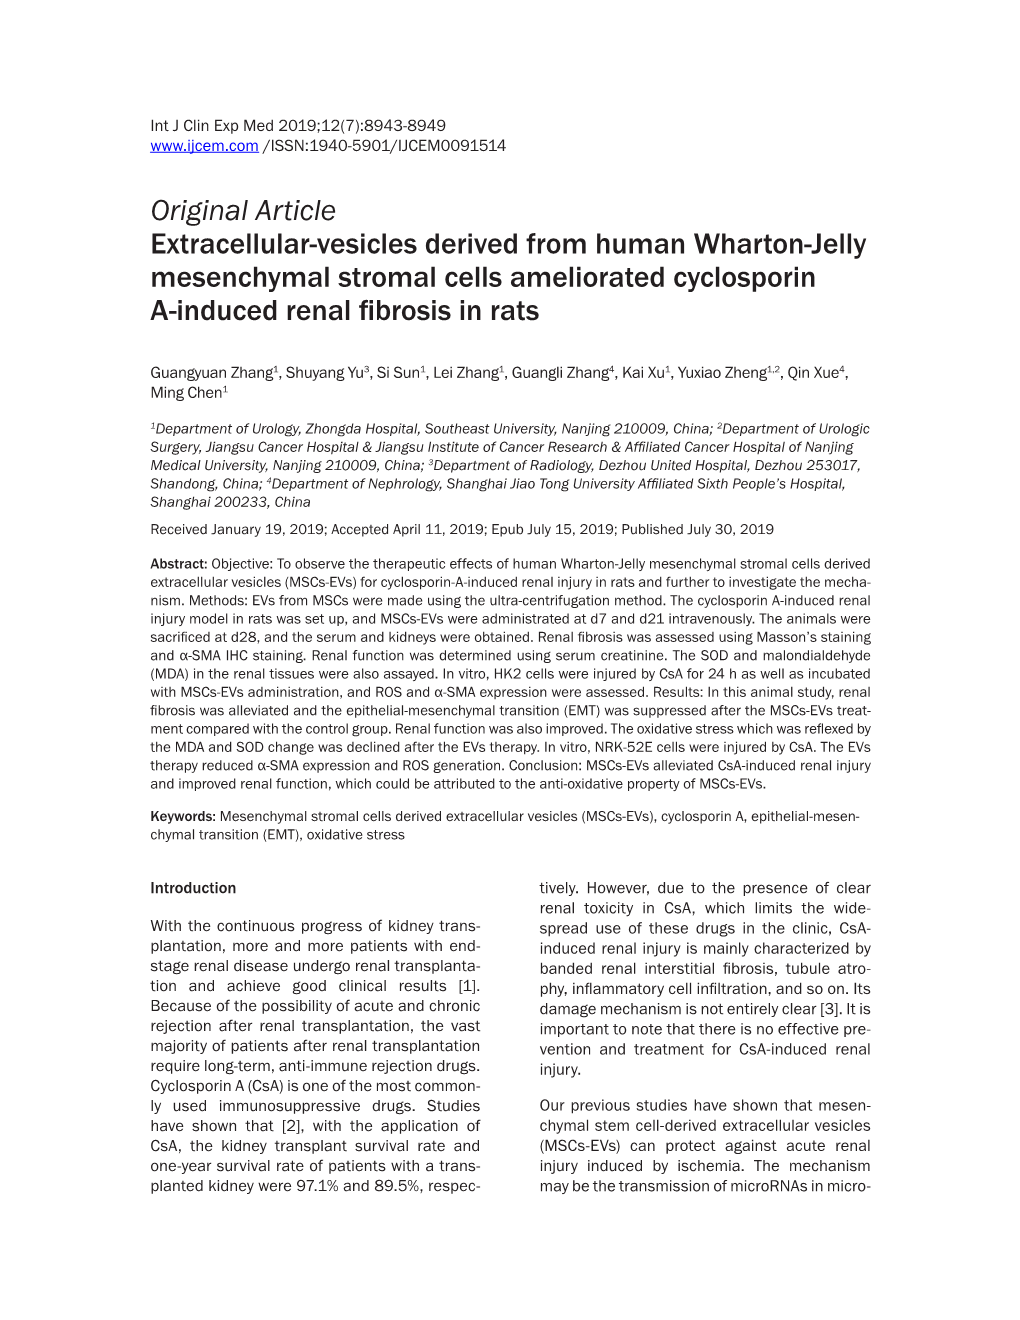 Original Article Extracellular-Vesicles Derived from Human Wharton-Jelly Mesenchymal Stromal Cells Ameliorated Cyclosporin A-Induced Renal Fibrosis in Rats